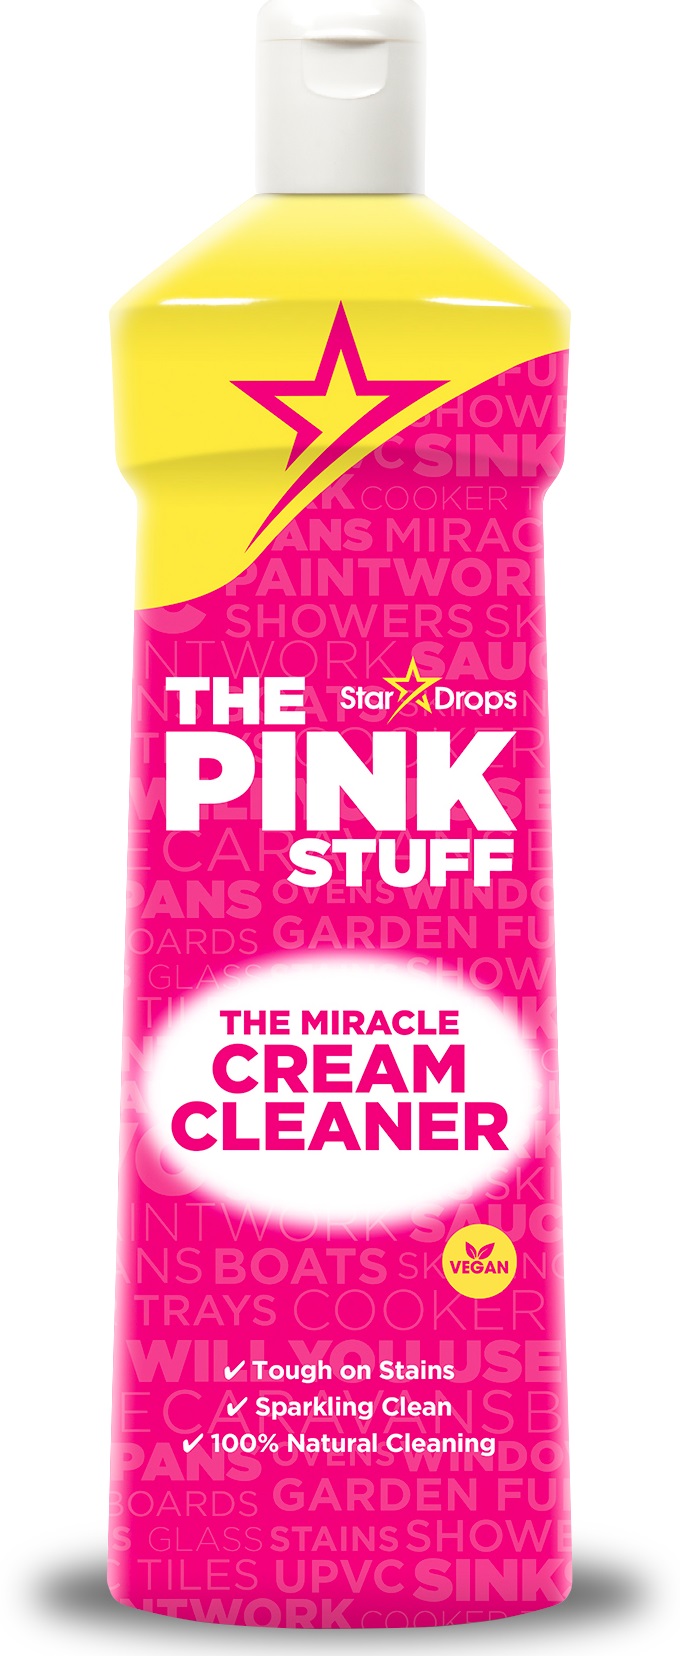 https://lyko.com/globalassets/product-images/the-pink-stuff-the-miracle-cream-cleaner-500ml-3278-101-0500_1.jpg?ref=319D18A341